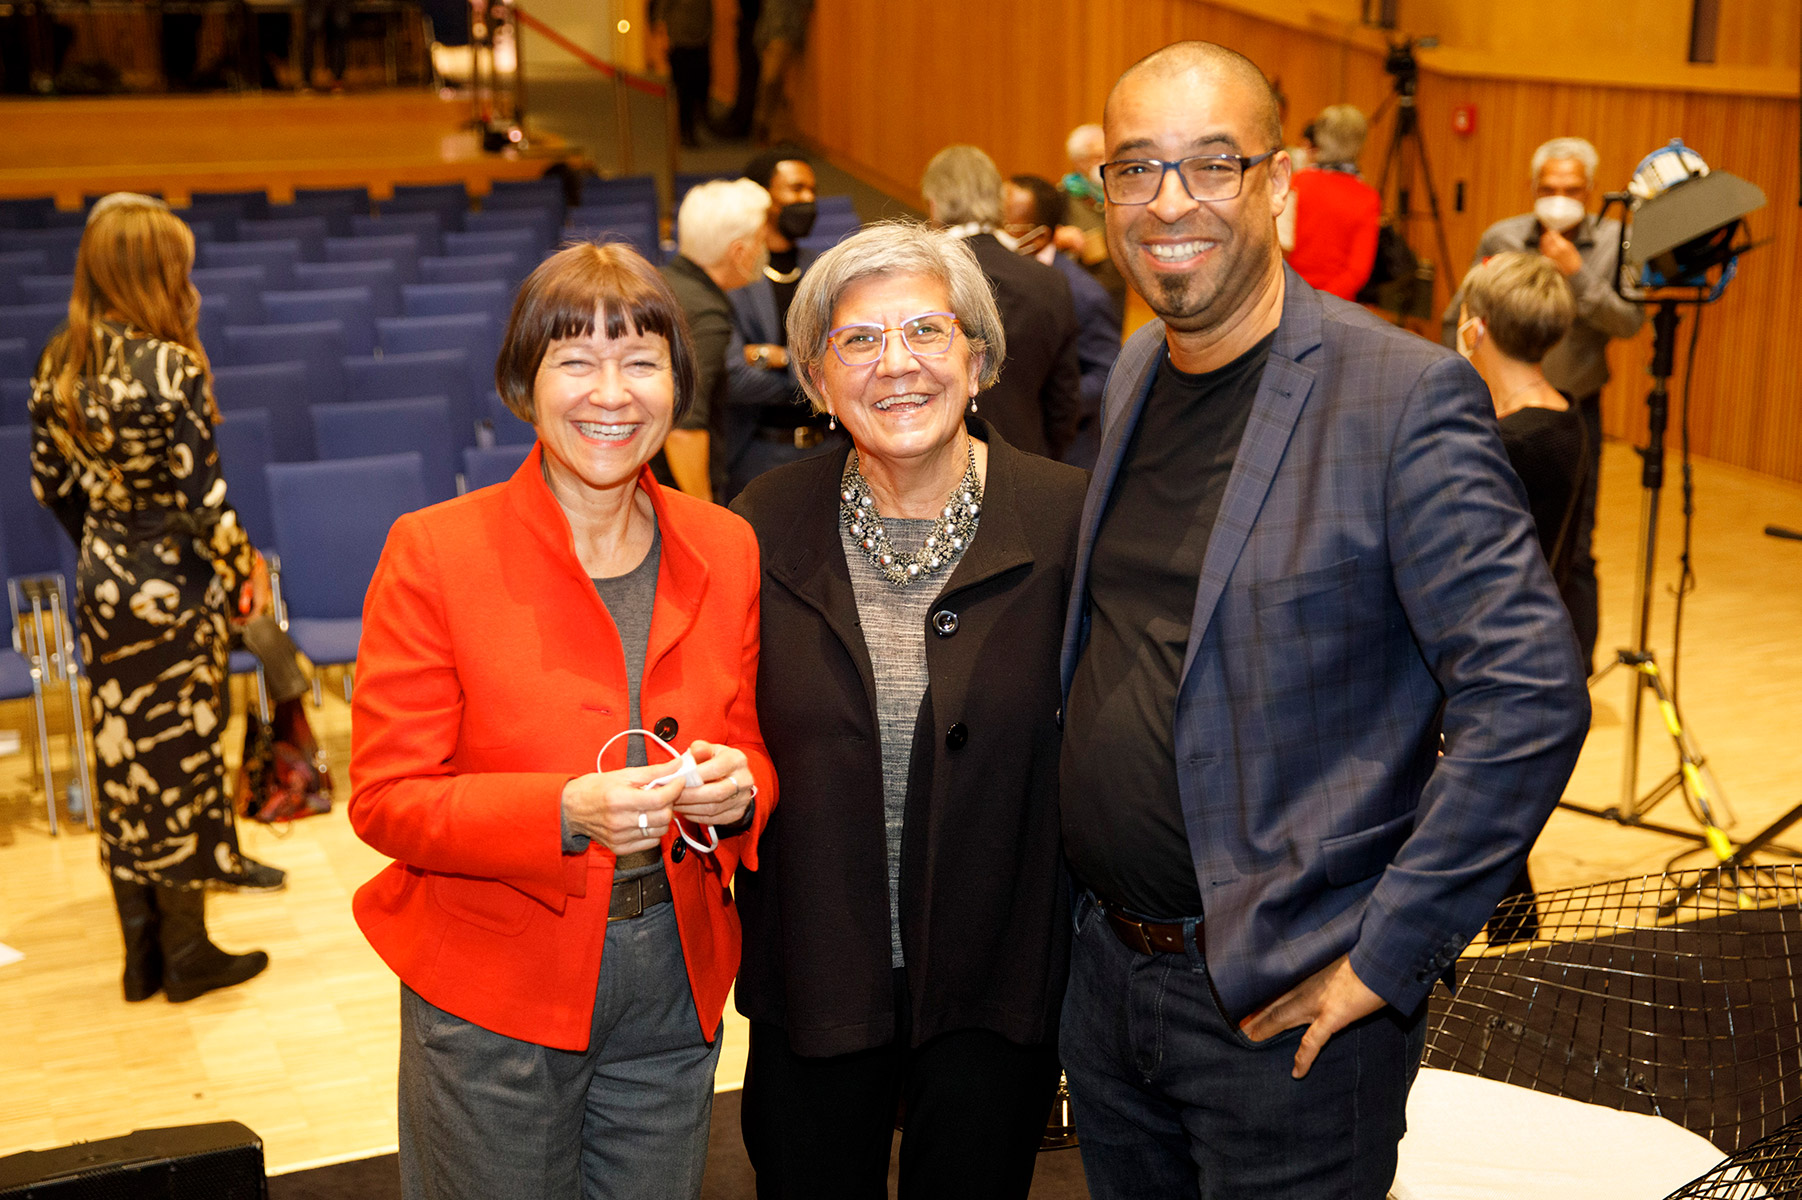 Prof. Maria Höhn (center) visited the premiere of the documentary together with the filmmaker Sigrid Faltin (left) and Raymond Germany, a protagonist in the film.